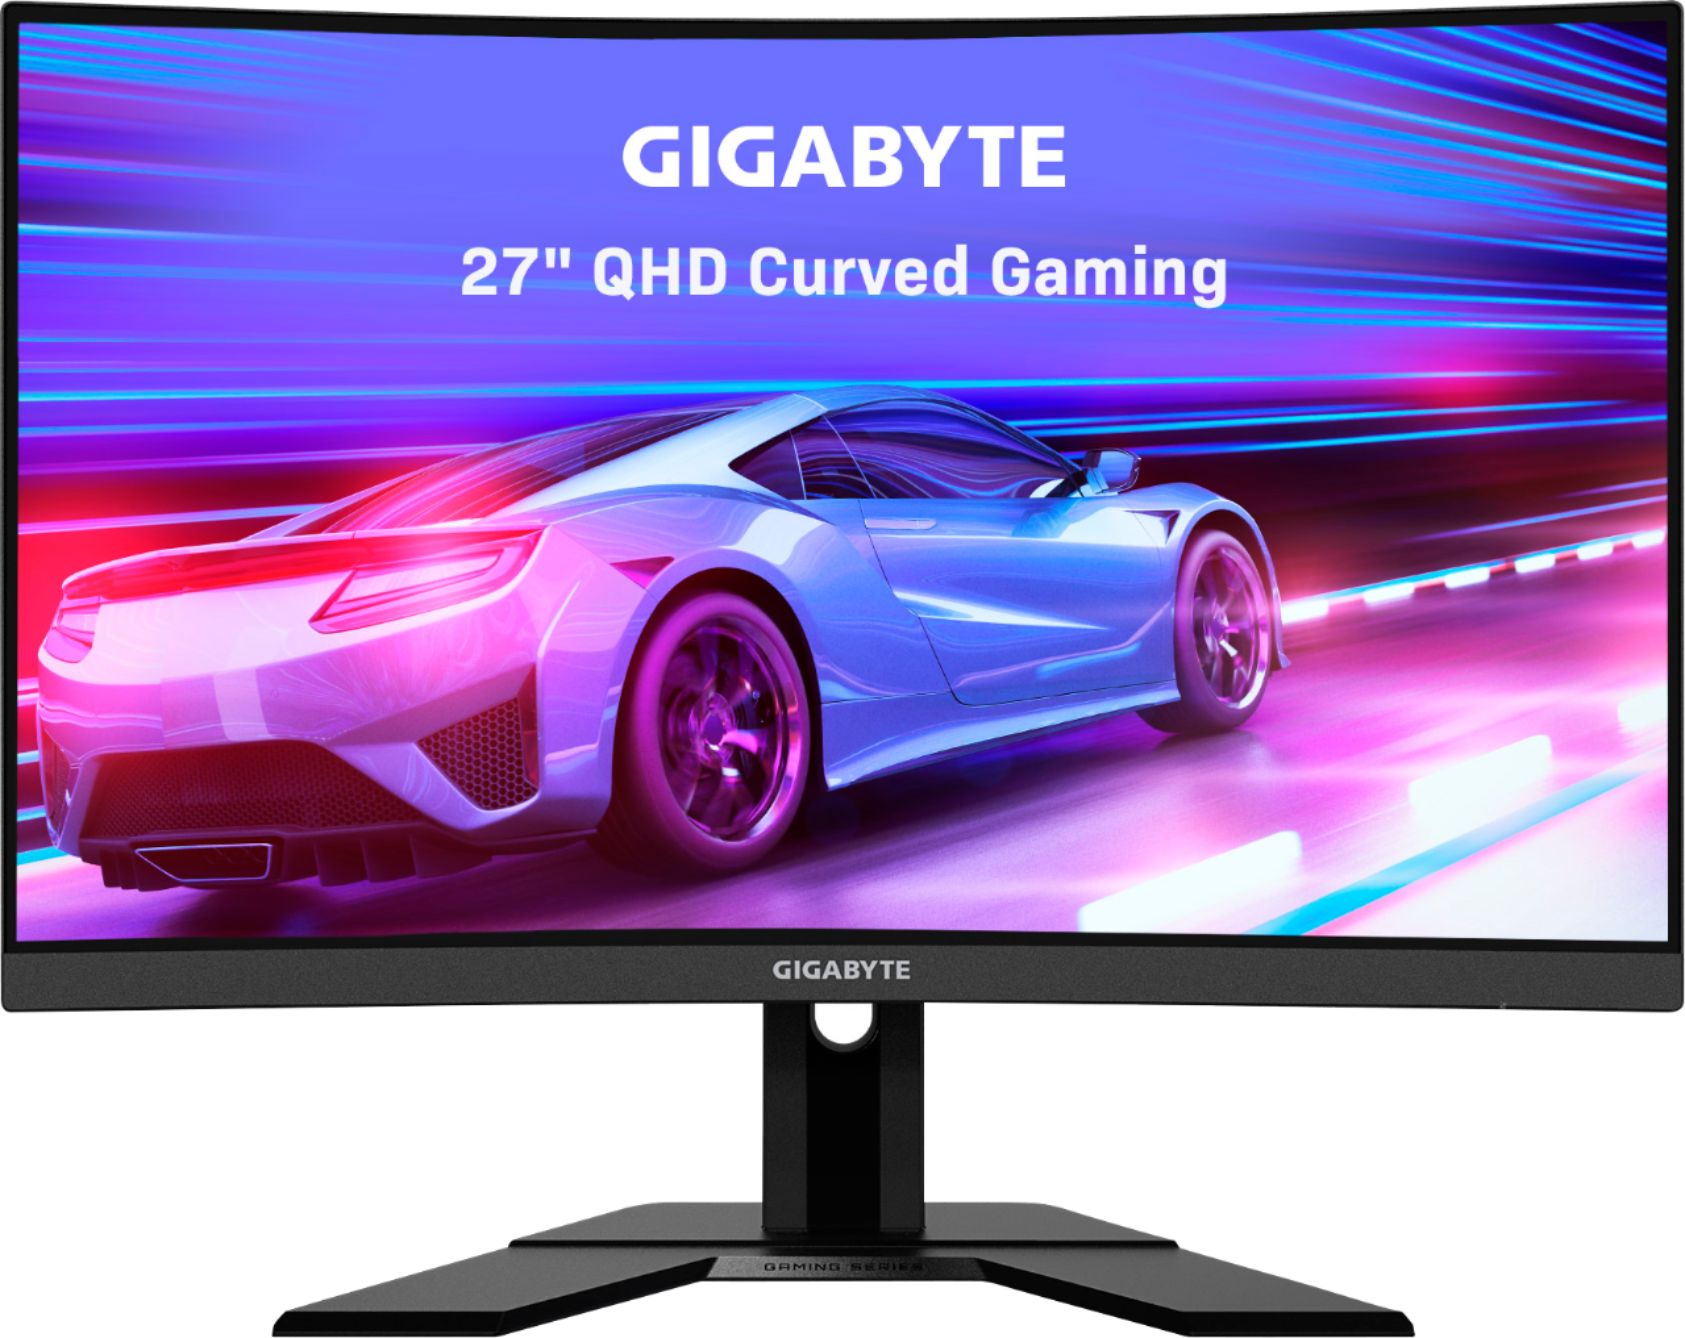 The 1440p 144Hz Gigabyte G27Q gaming monitor is $70 off today